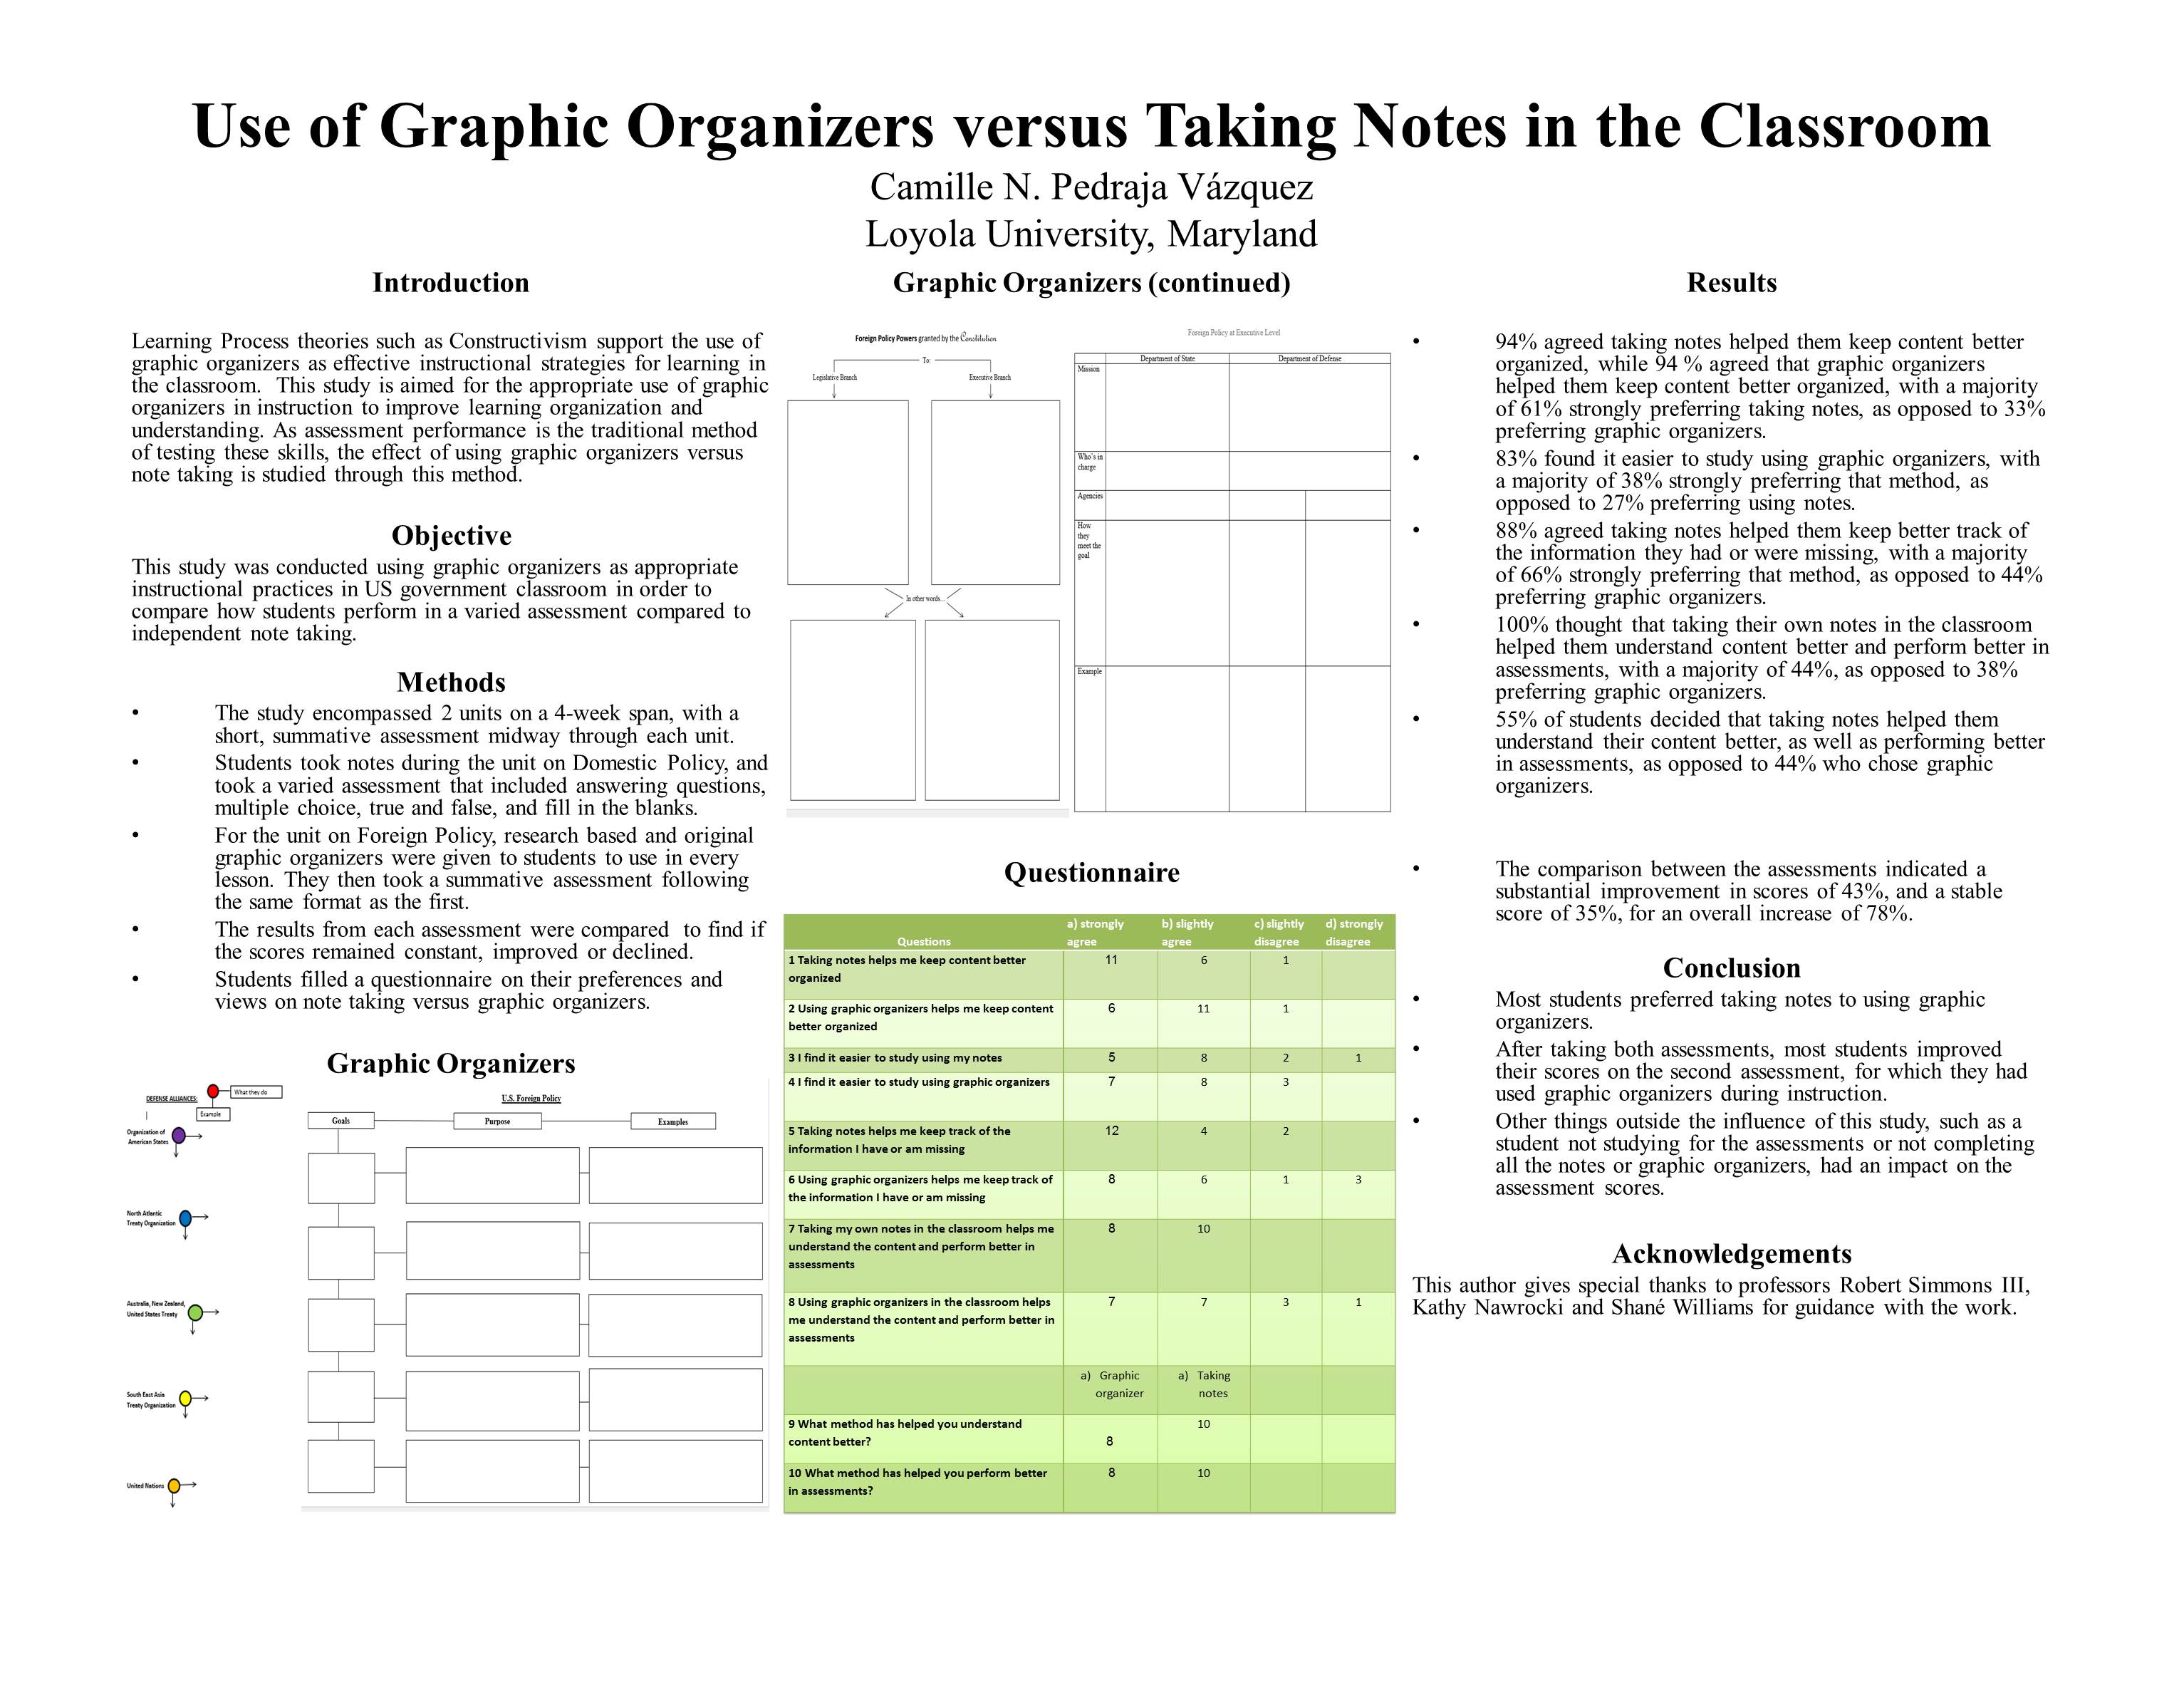 Enlarged poster image: Use of Graphic Organizers versus Taking Notes in the Classroom